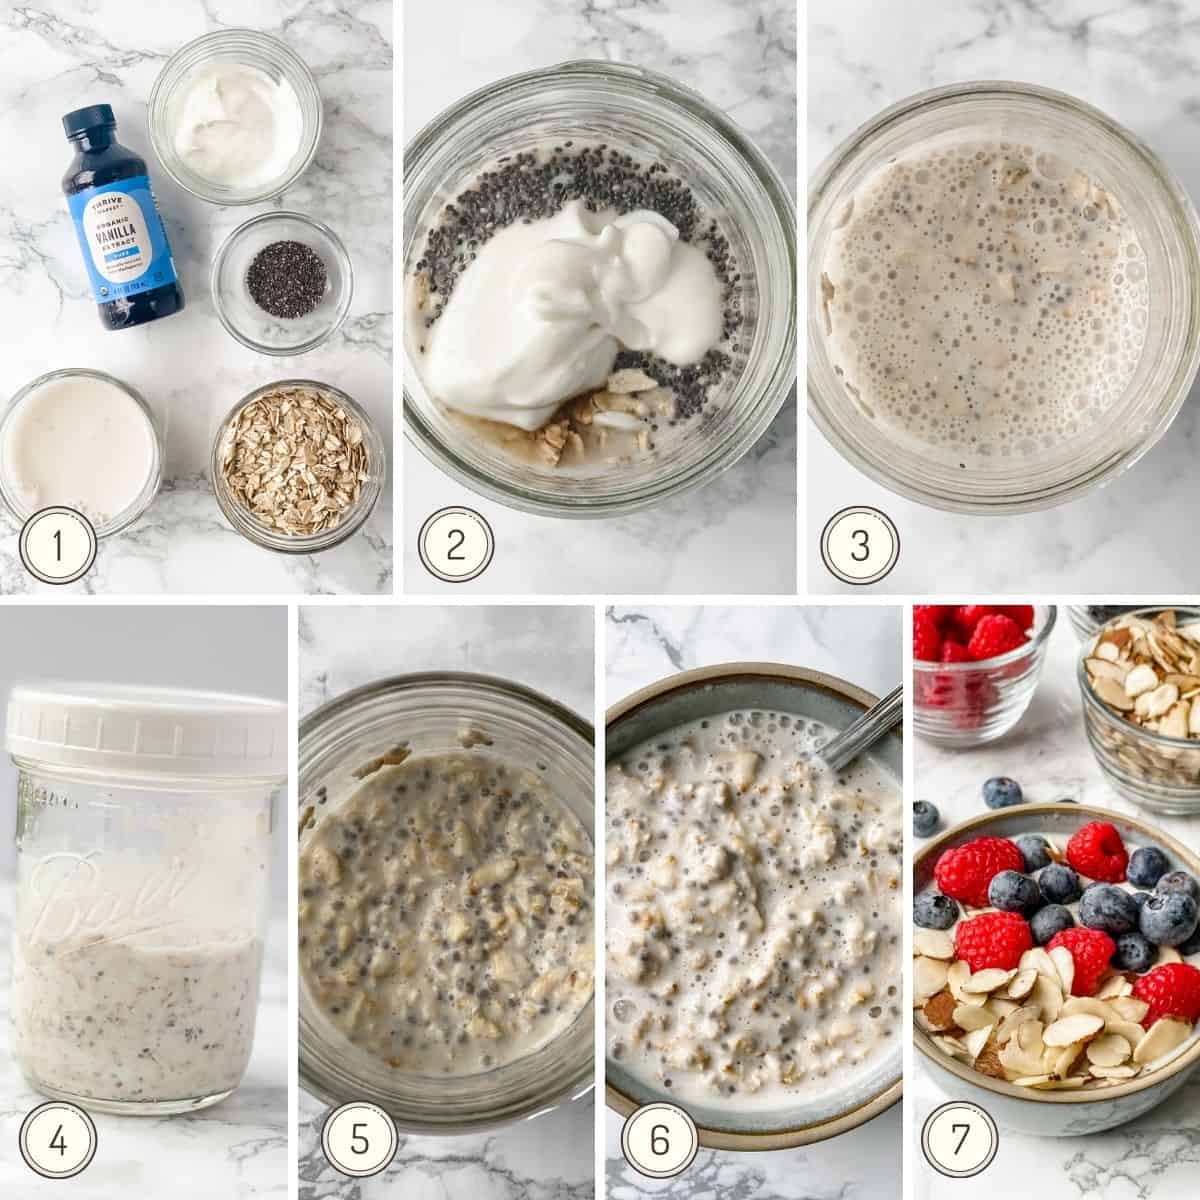 step by step clog showing how to make overnight oats.